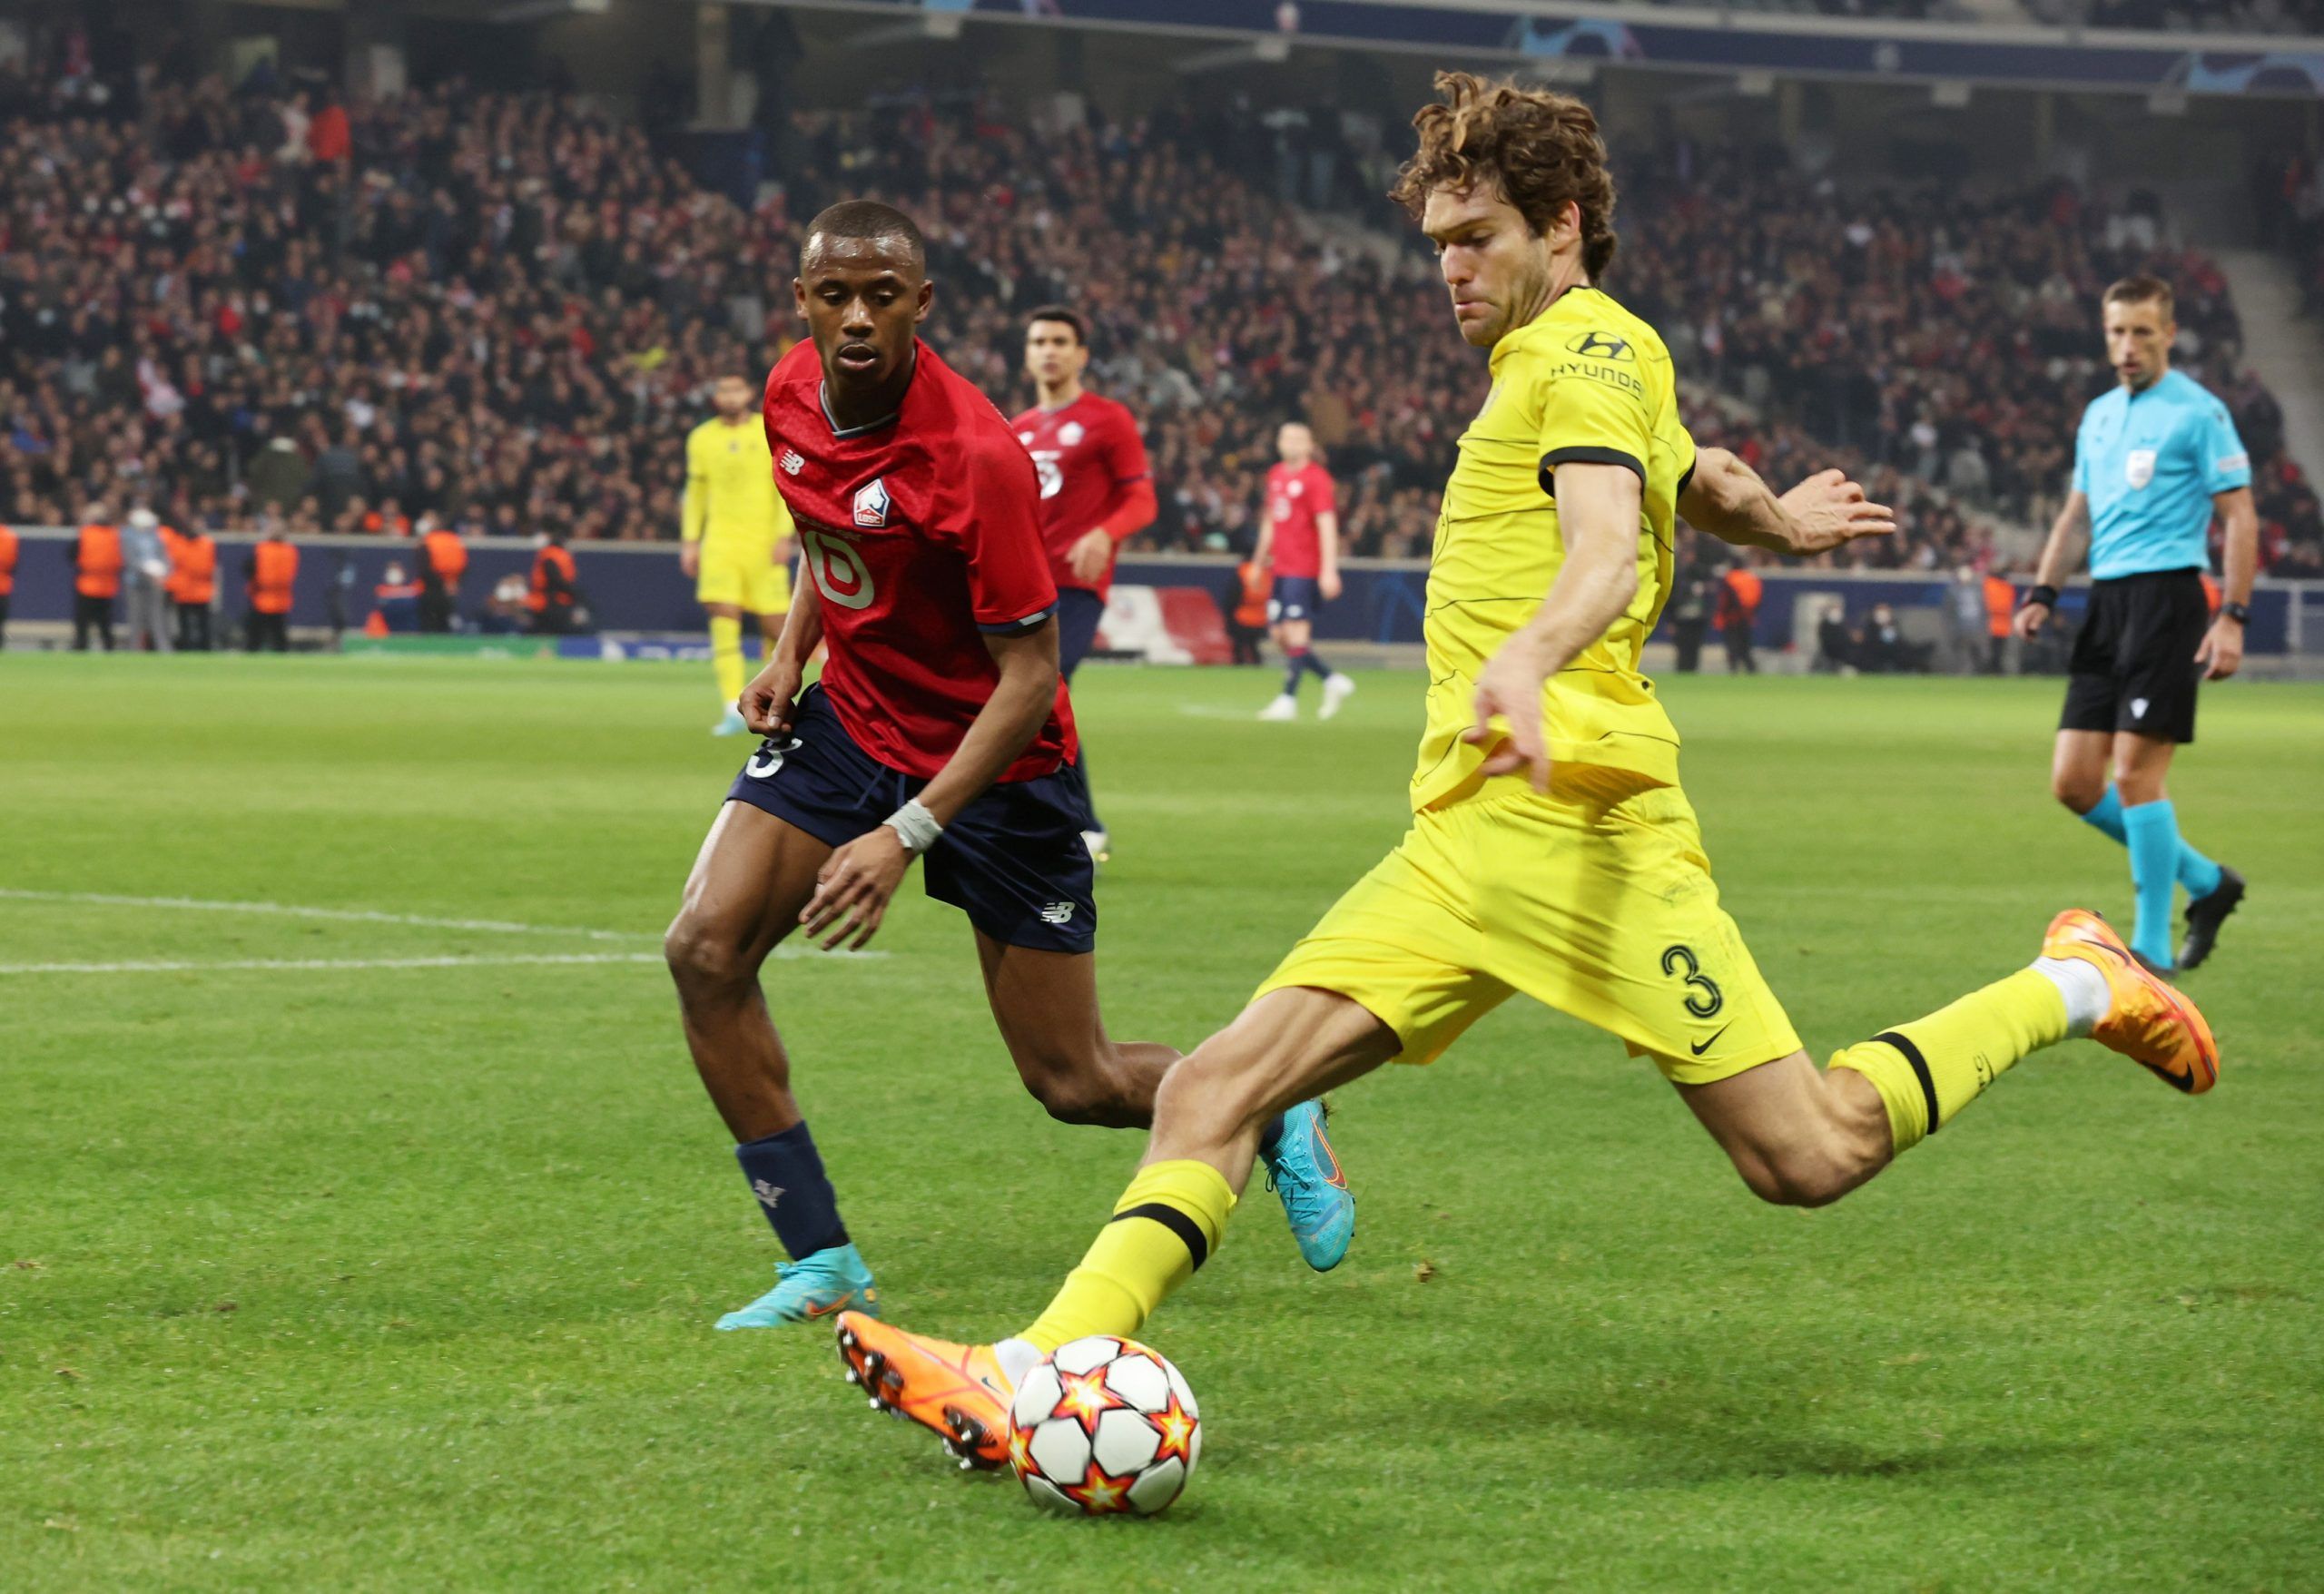 Soccer Football - Champions League - Lille v Chelsea - Stade Pierre-Mauroy, Villeneuve-d'Ascq, France - March 16, 2022 Chelsea's Marcos Alonso in action with Lille's Tiago Djalo REUTERS/Pascal Rossignol